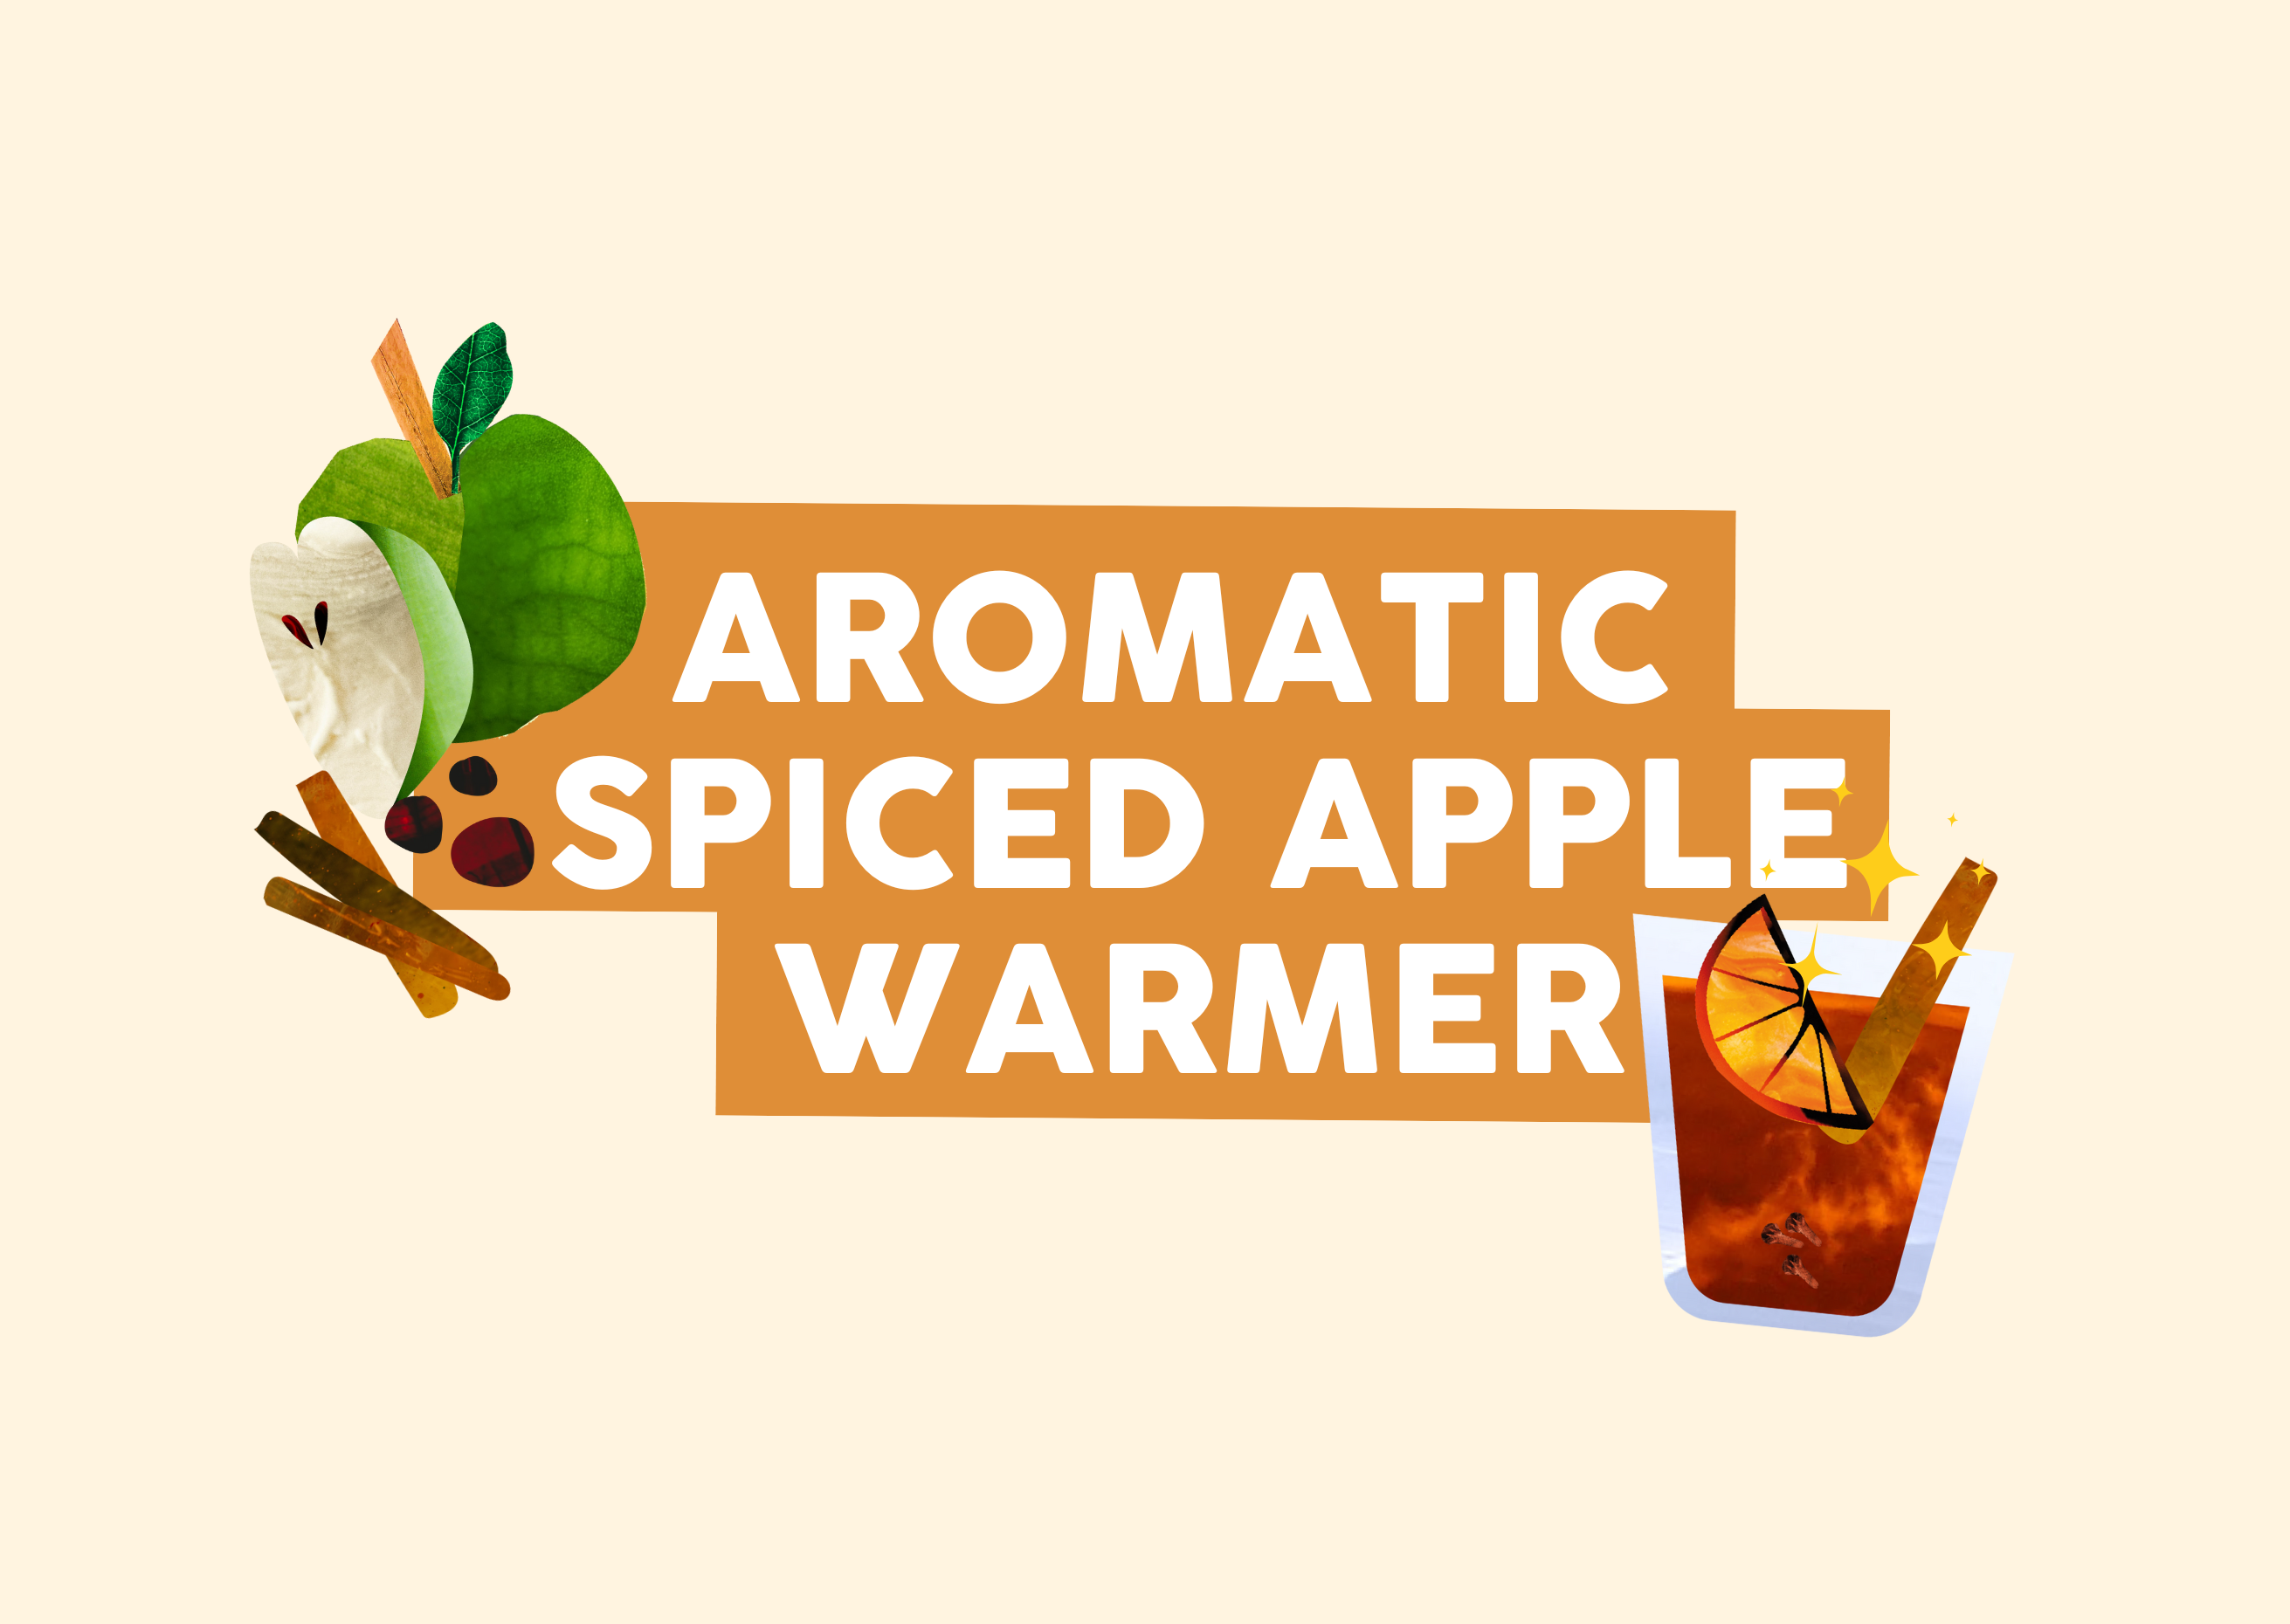 A WARMING APPLE MOCKTAIL FOR THE WHOLE FAMILY